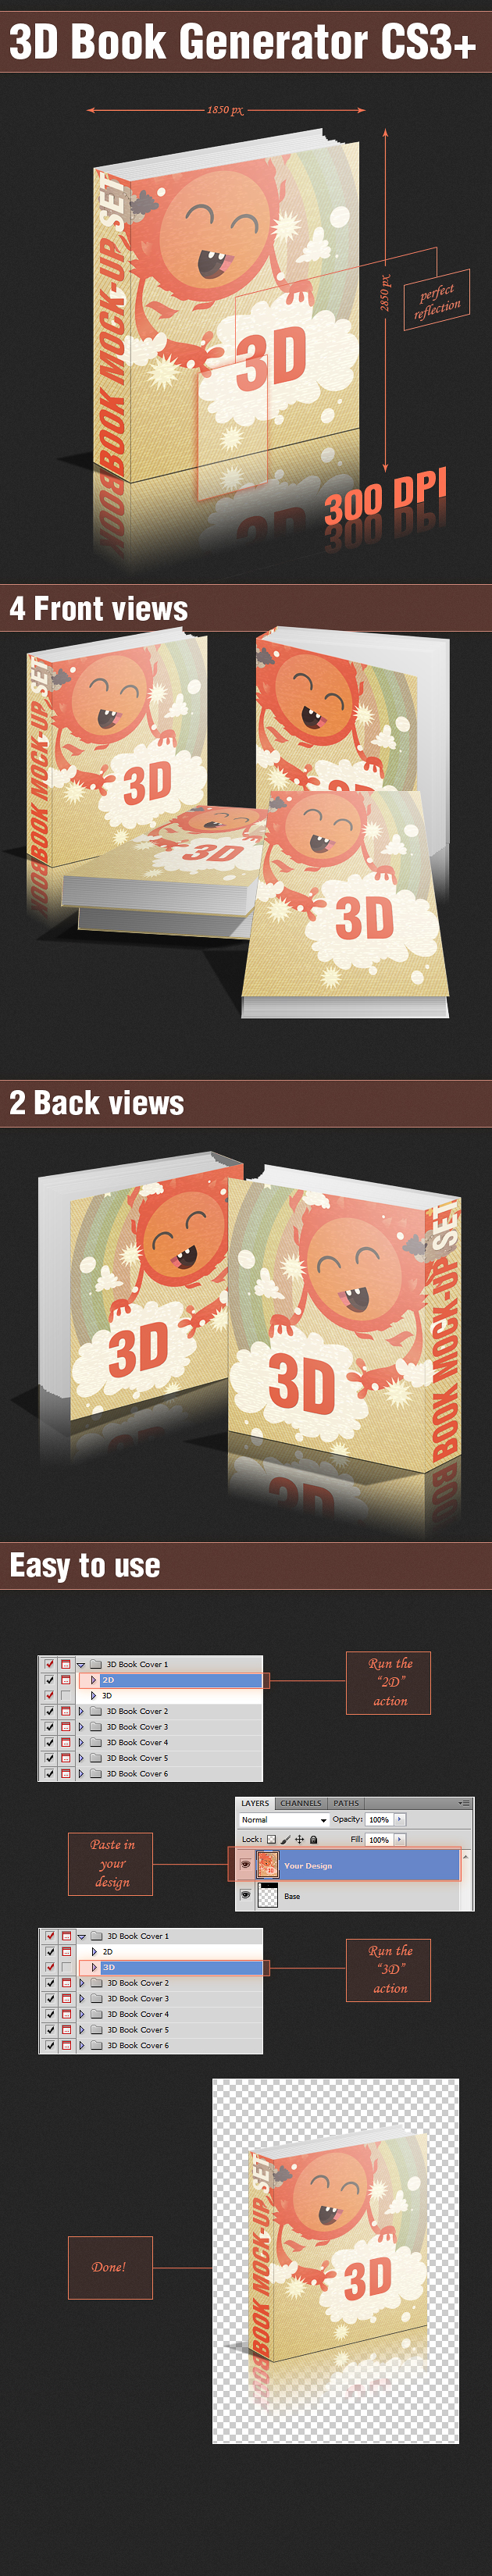 Free 3D Book Generator Photoshop Actions 2